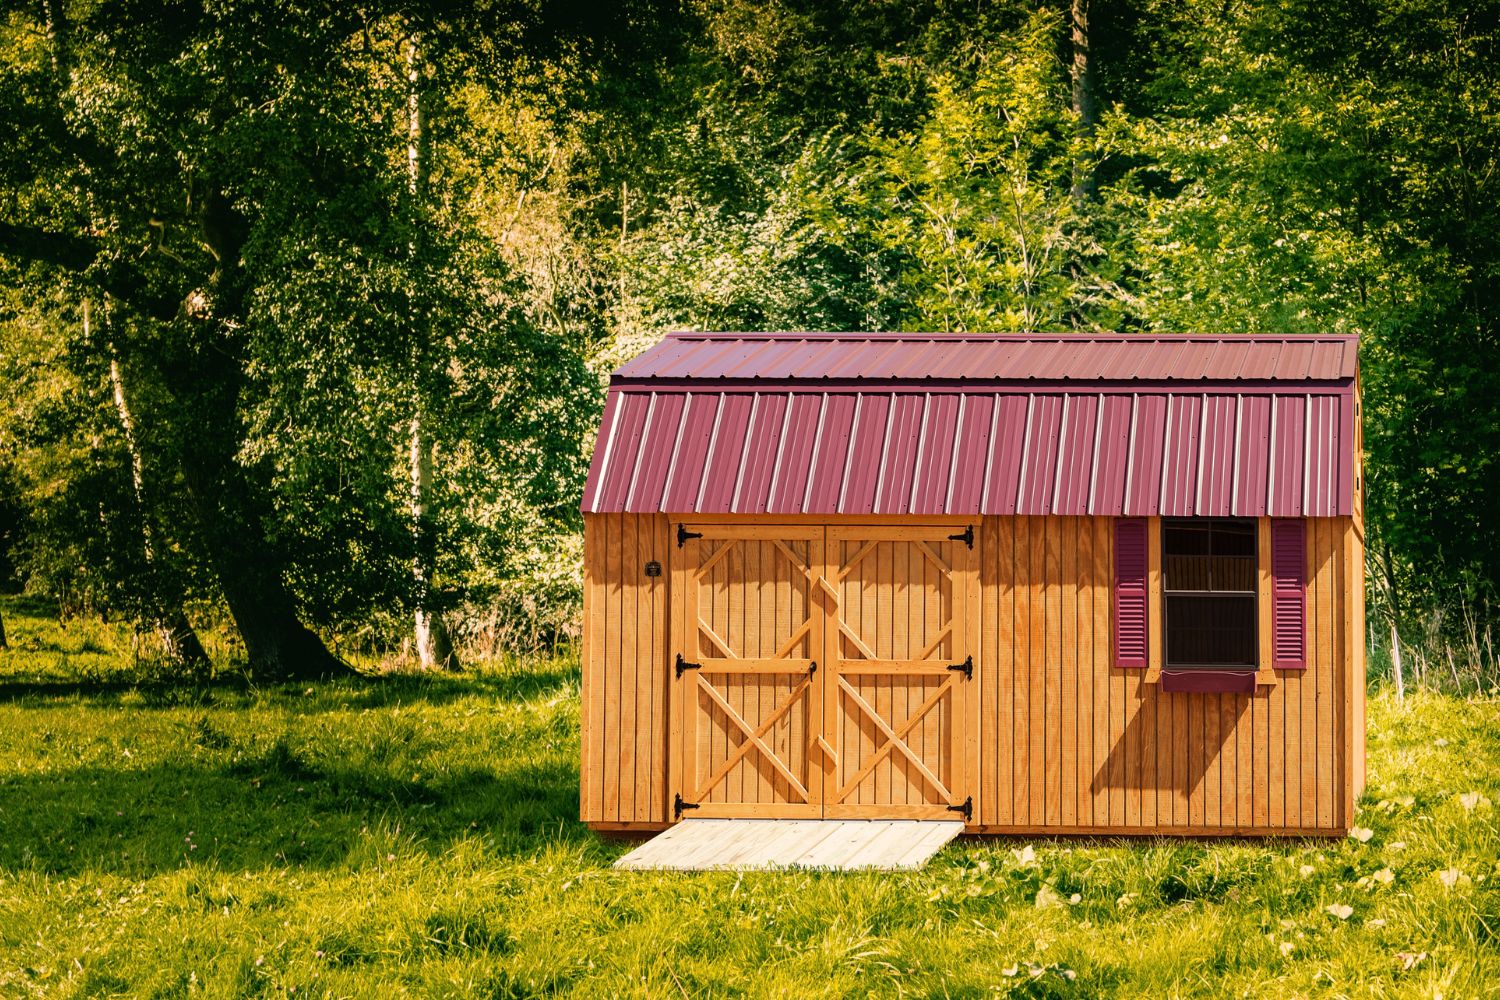 Roof Options for 12x12 Sheds